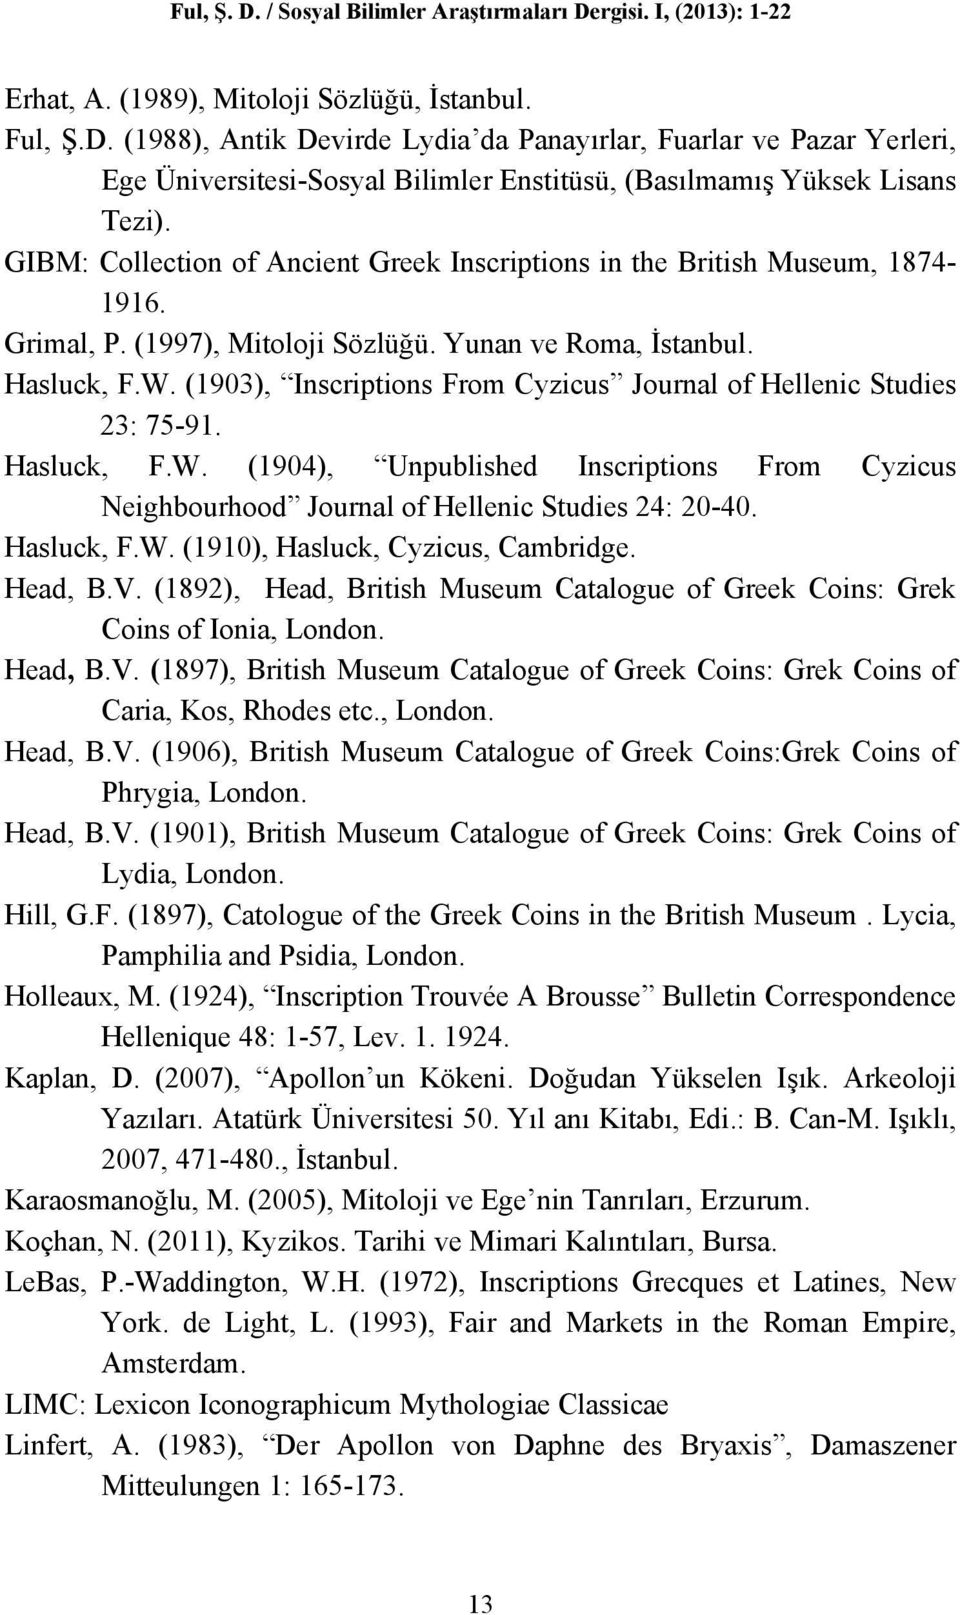 (1903), Inscriptions From Cyzicus Journal of Hellenic Studies 23: 75-91. Hasluck, F.W. (1904), Unpublished Inscriptions From Cyzicus Neighbourhood Journal of Hellenic Studies 24: 20-40. Hasluck, F.W. (1910), Hasluck, Cyzicus, Cambridge.